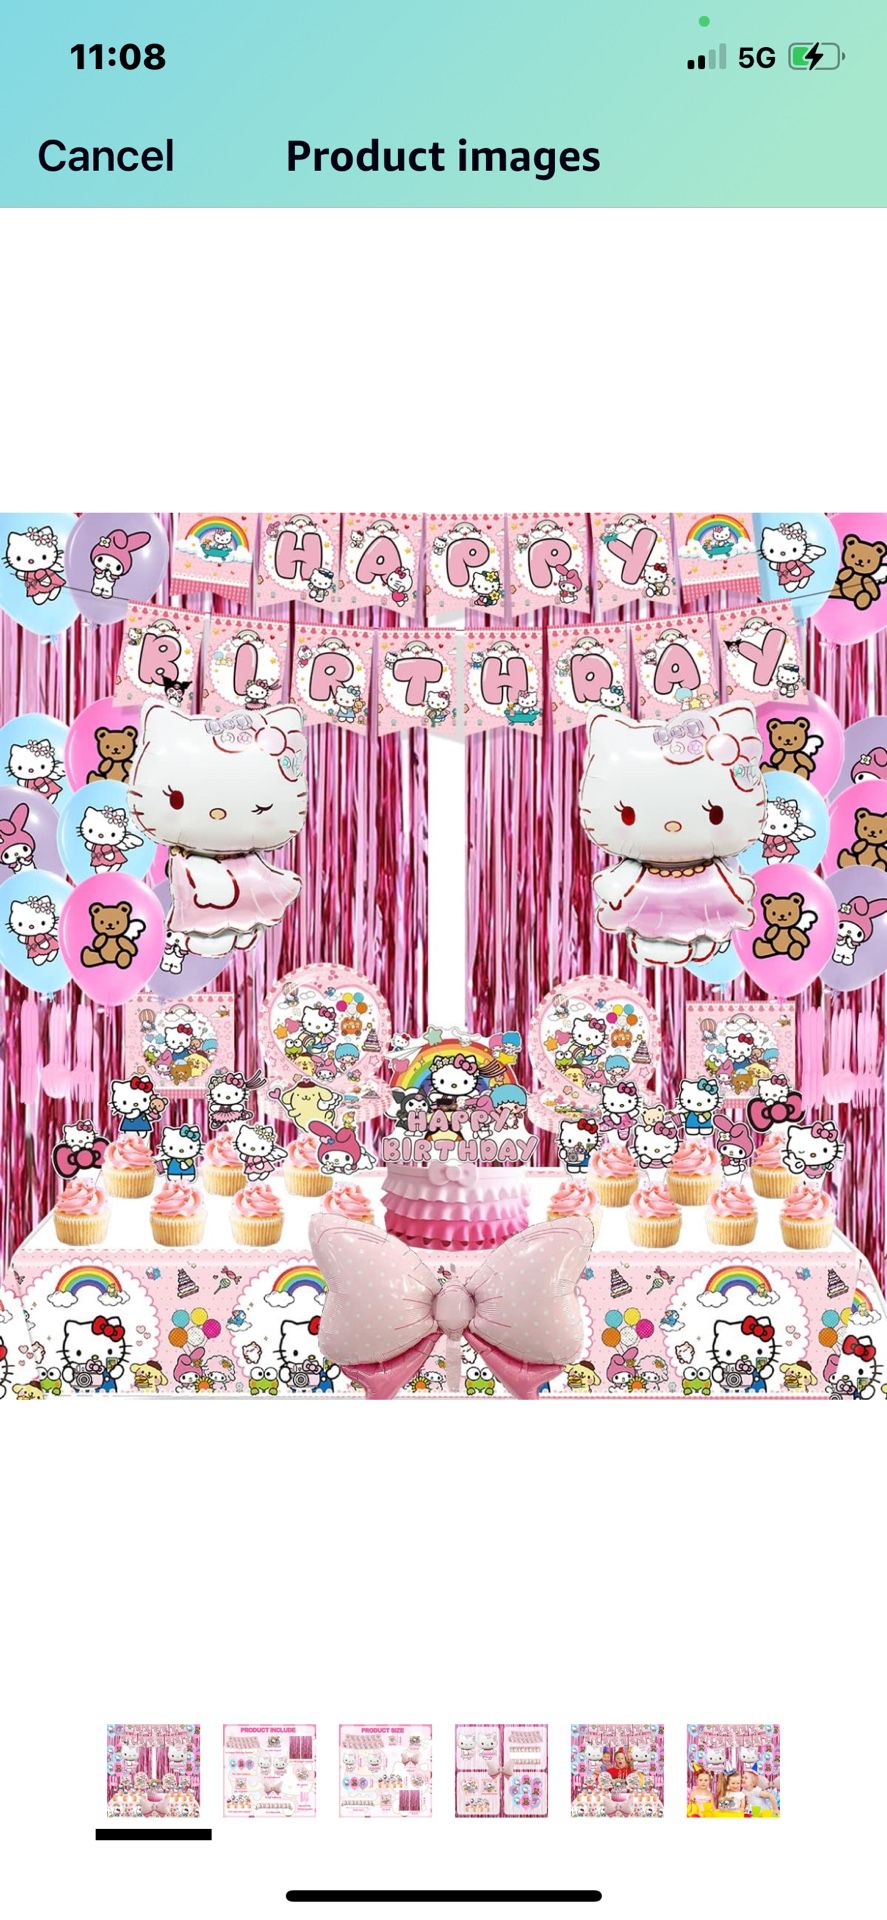 159PCS Pink Kitty Birthday Decorations, Cute Kitty Party Supplies include Happy Birthday Balloons, Foil Fringe Curtains, Plates, Foil Balloons,Cake To